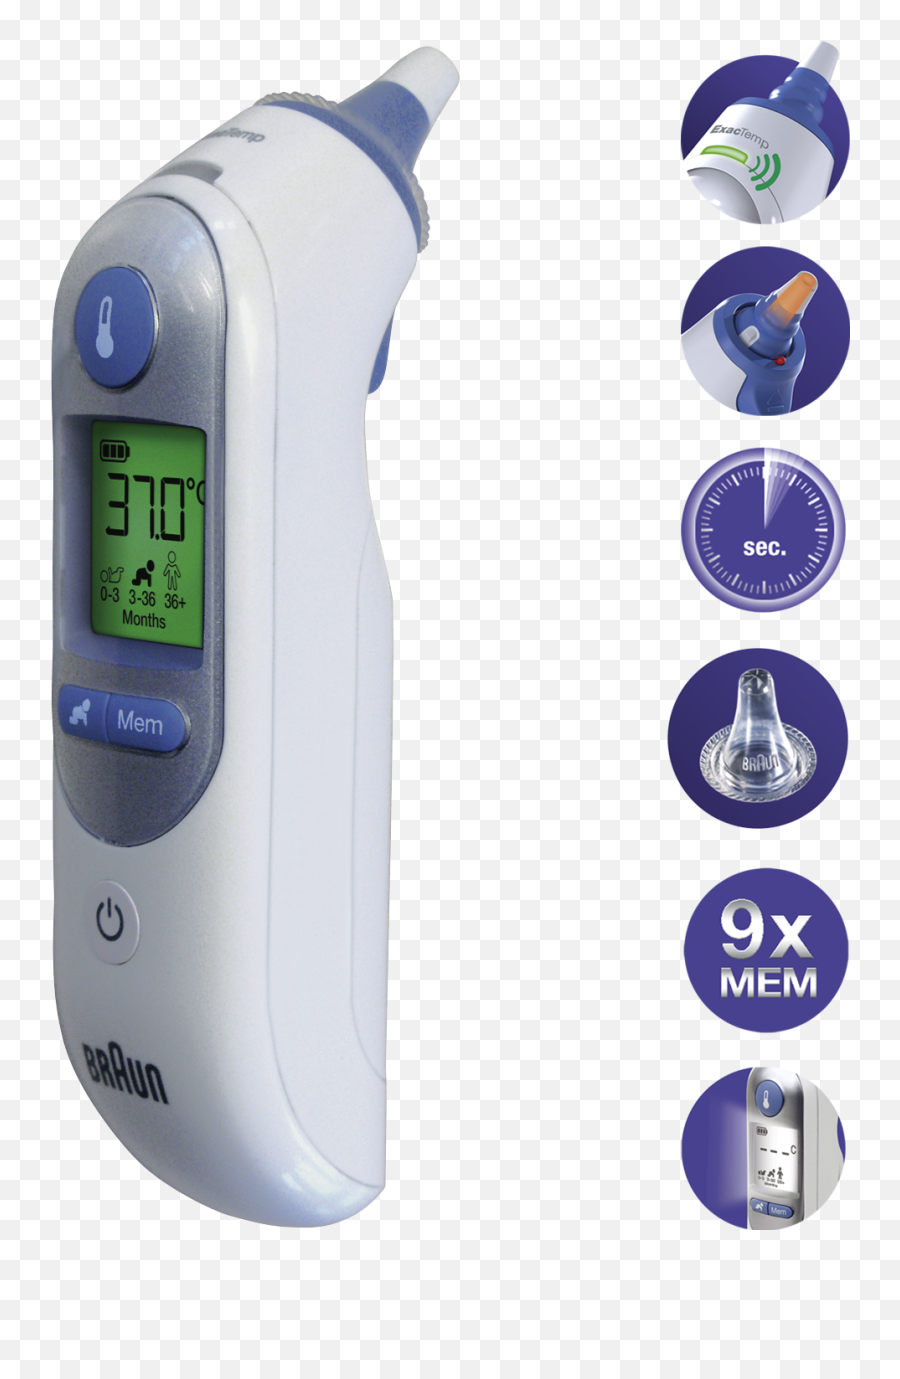 Braun Ear Thermometer Thermoscan 7 - Thermoscan 7 Braun Png,Thermometer Transparent Background